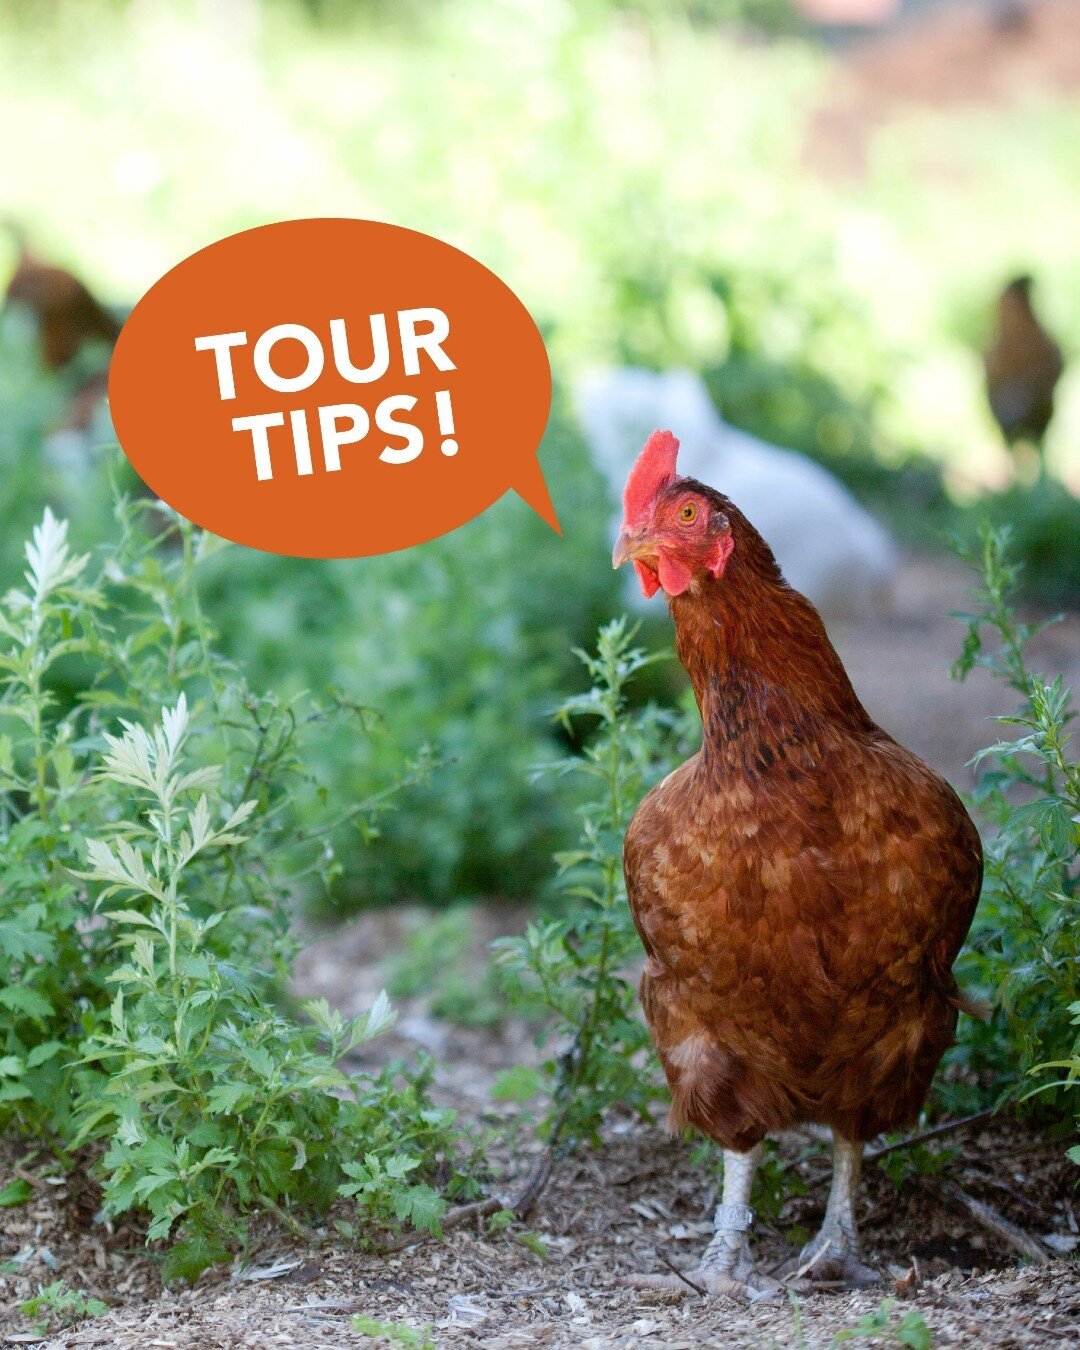 On July 16 from 10 am - 4 pm, 21 sustainable and organic farms in MN and western WI will open their doors for a day of free fun and learning on the farm. It's the Co-op Farm Tour, and you're invited!

Make the most of the day and have the best experi